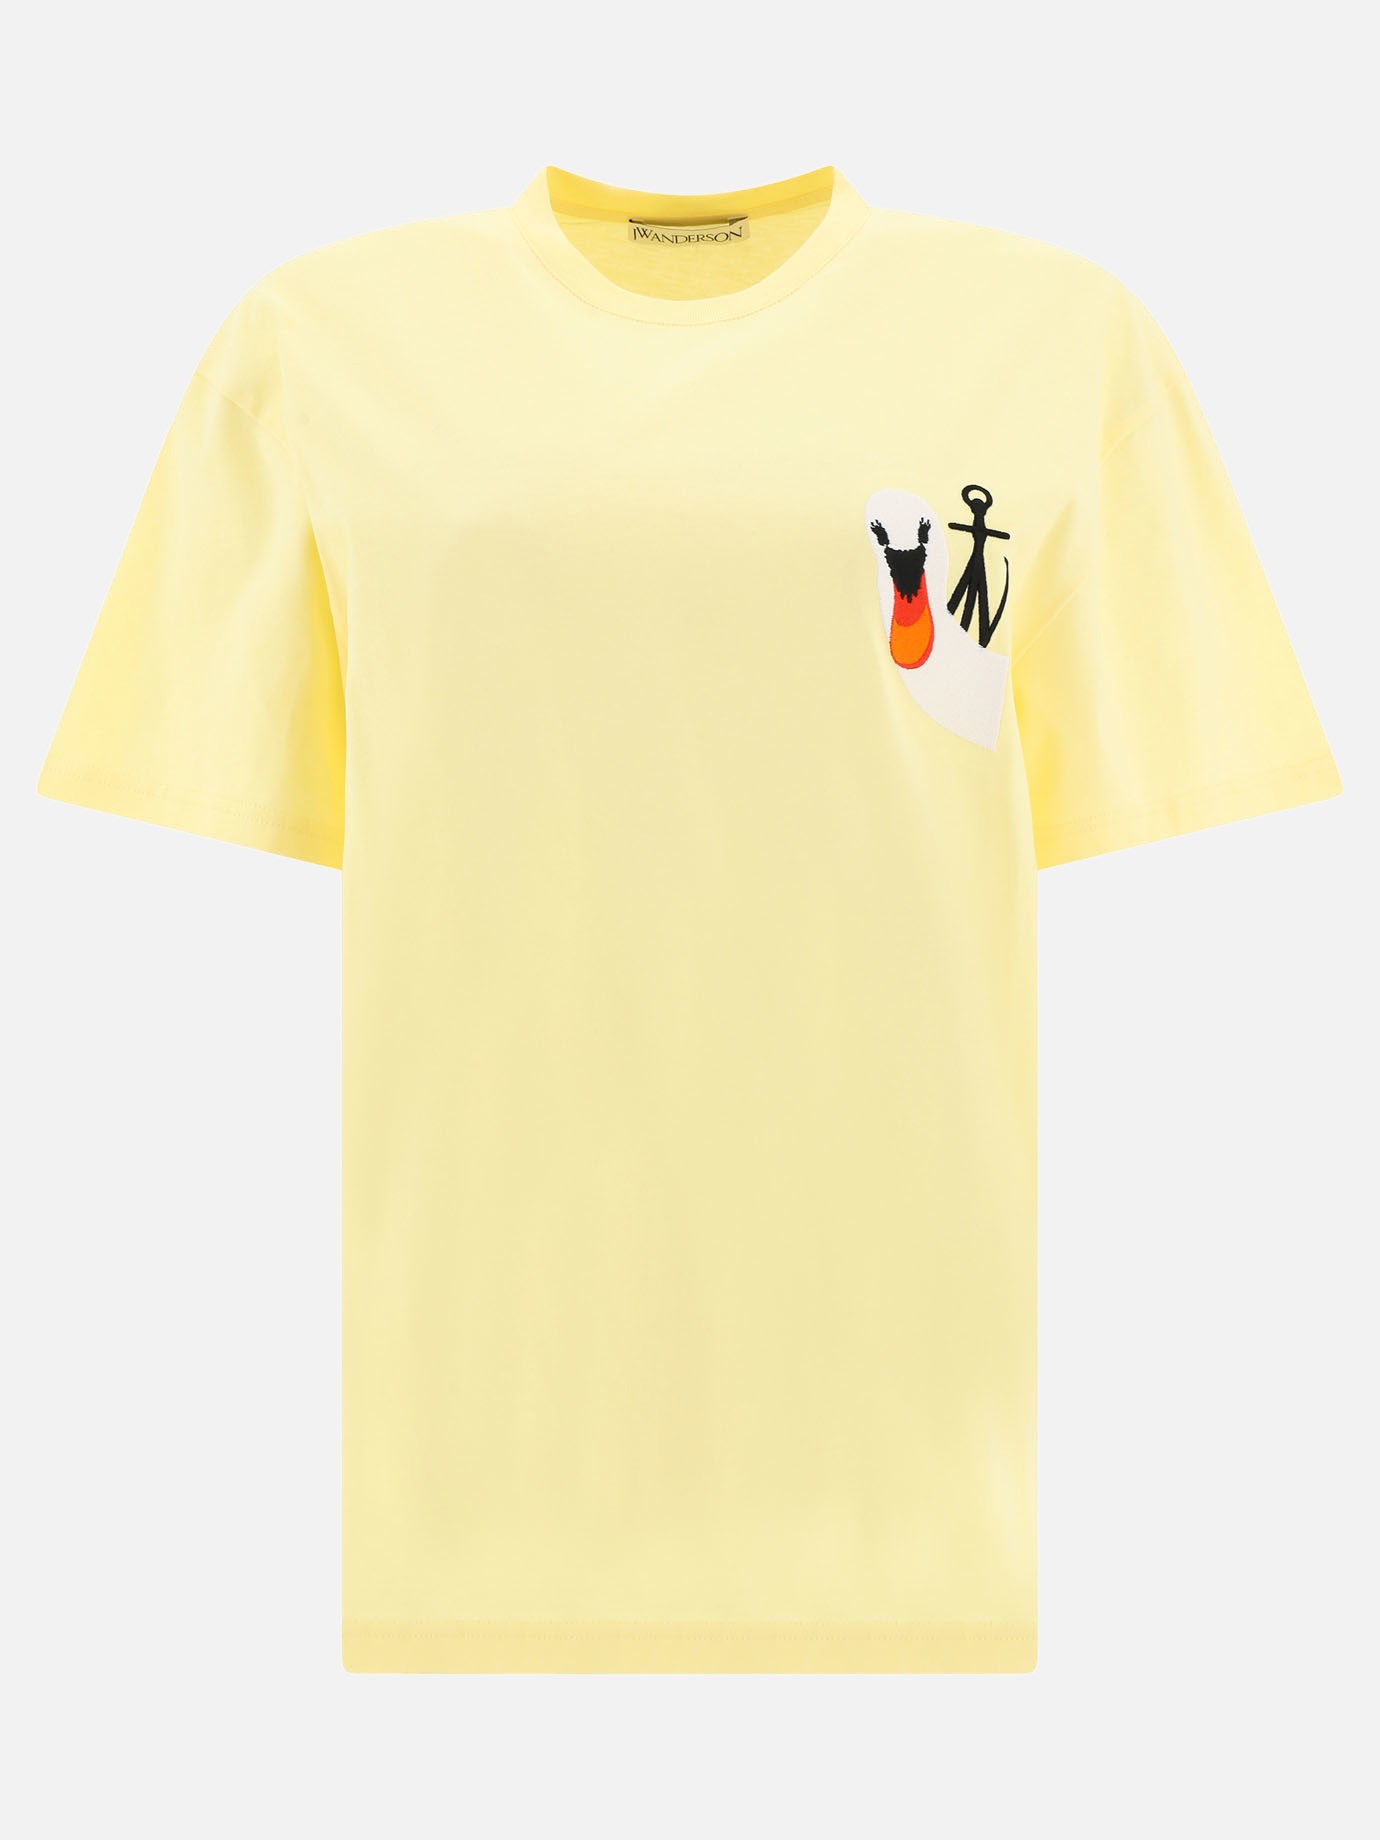  Swan  t-shirtby JW Anderson - 5